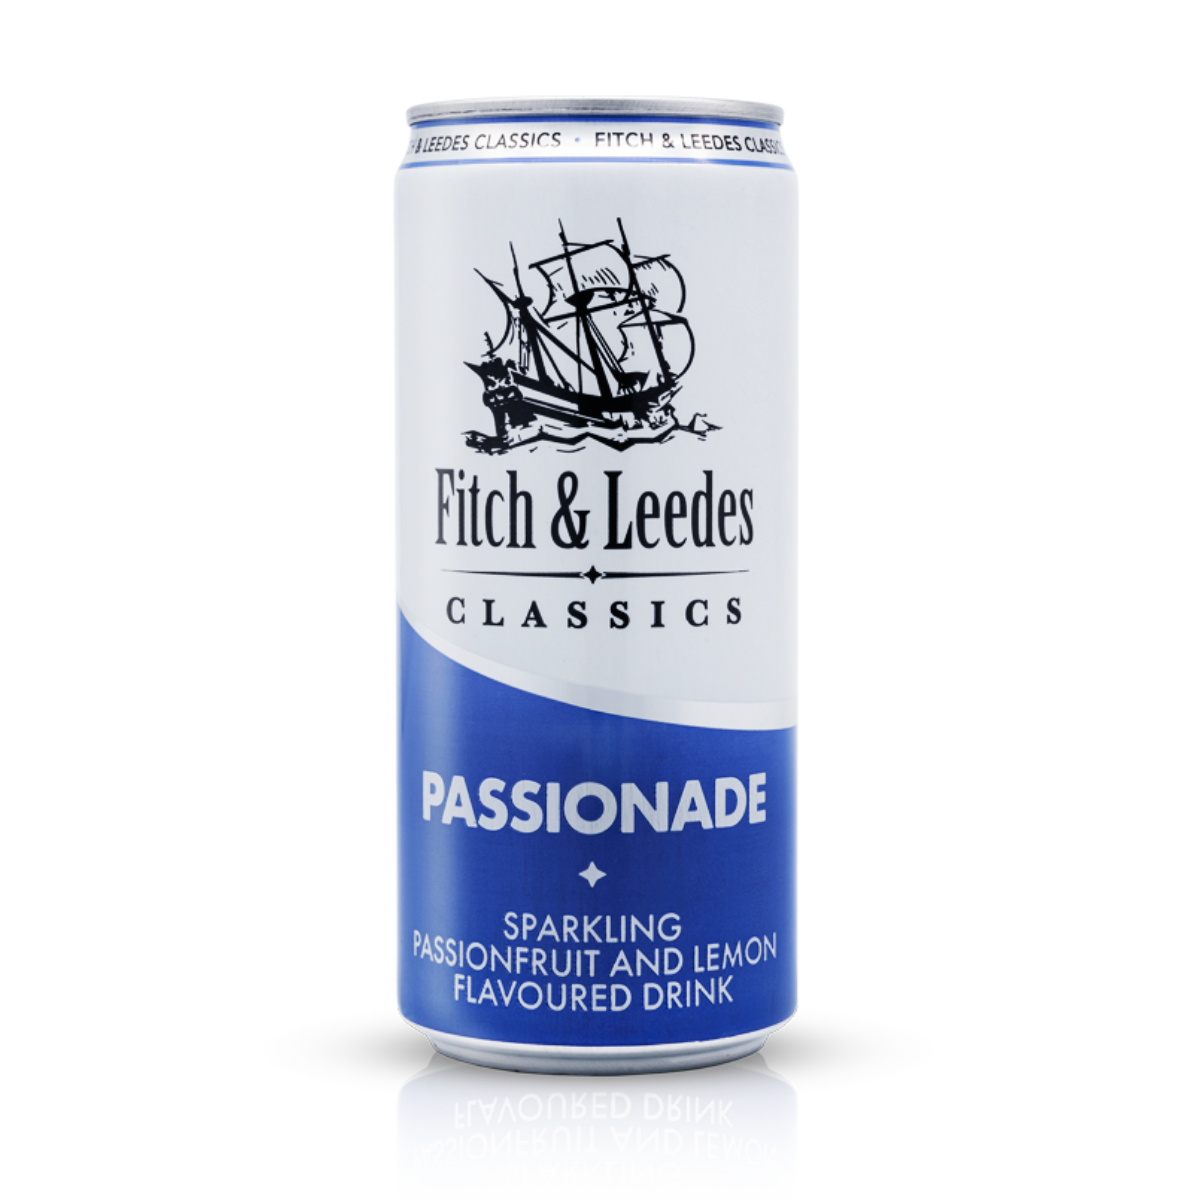 Fitch & Leedes Passionade (6 x 300ml)